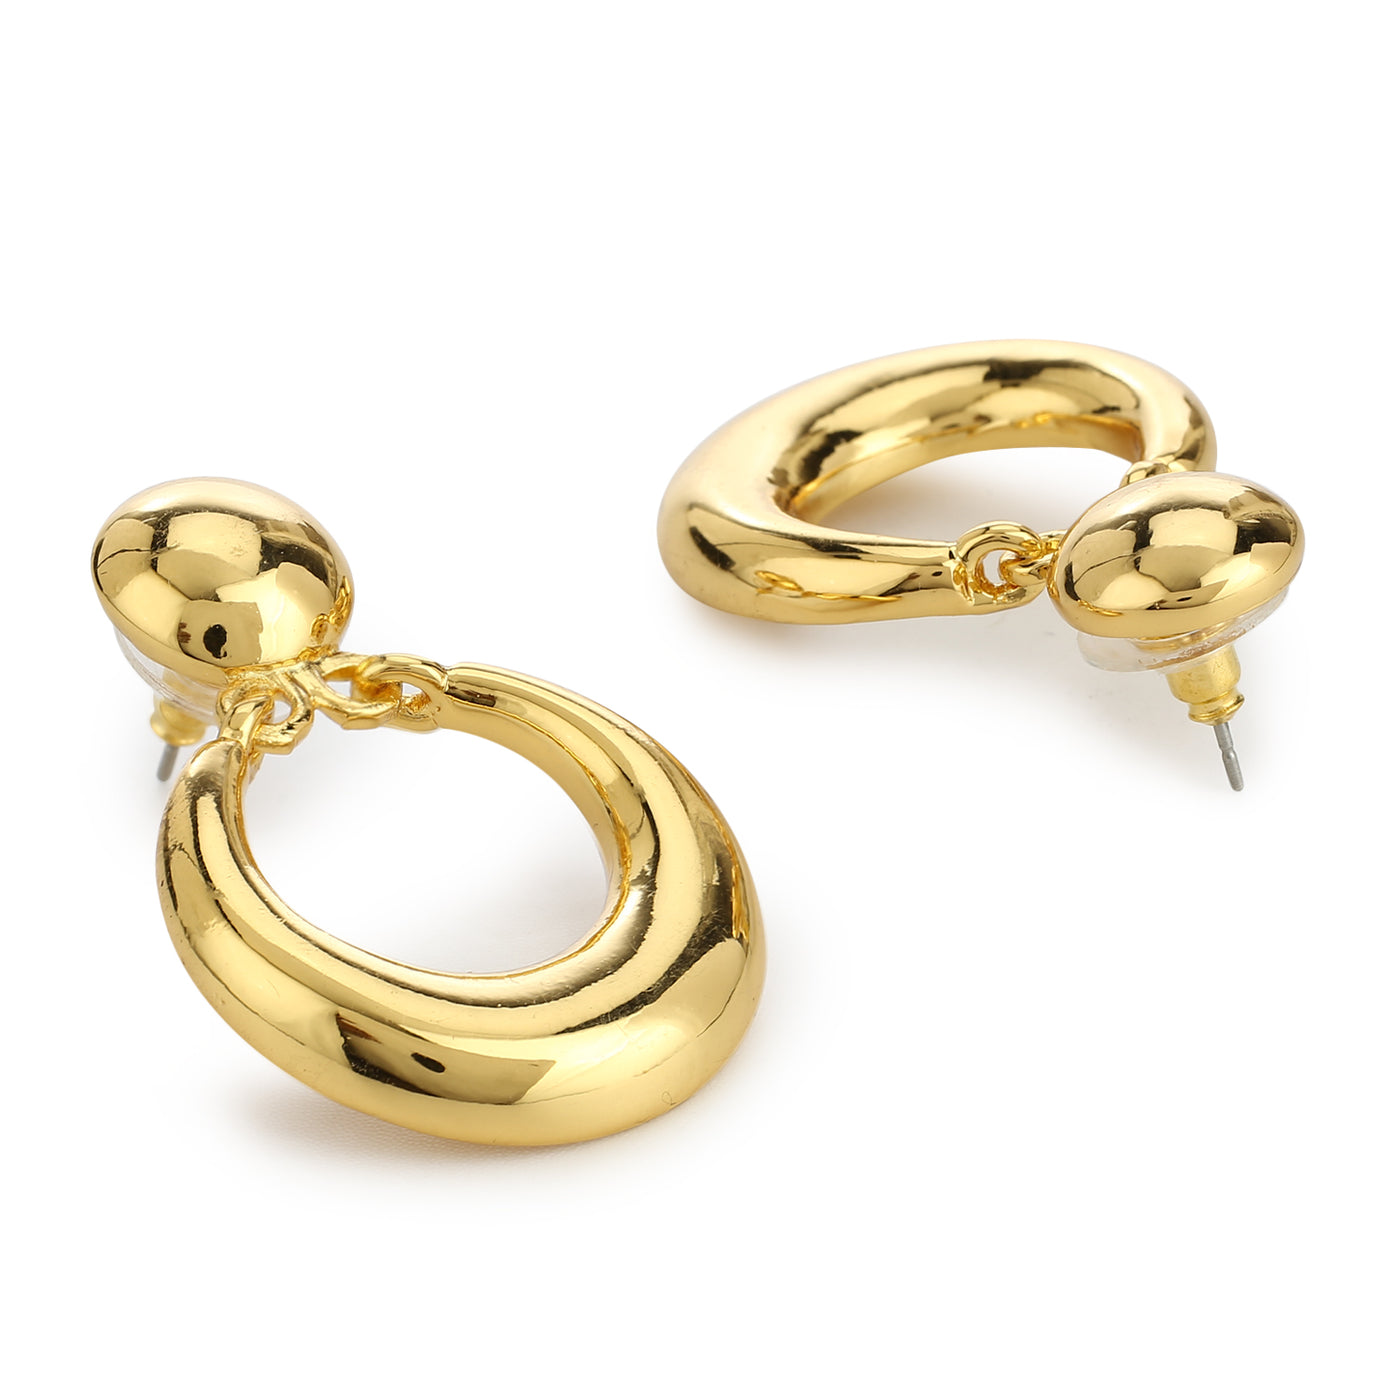 Estele Gold Plated Round Small Drop Earrings for Women/Girls